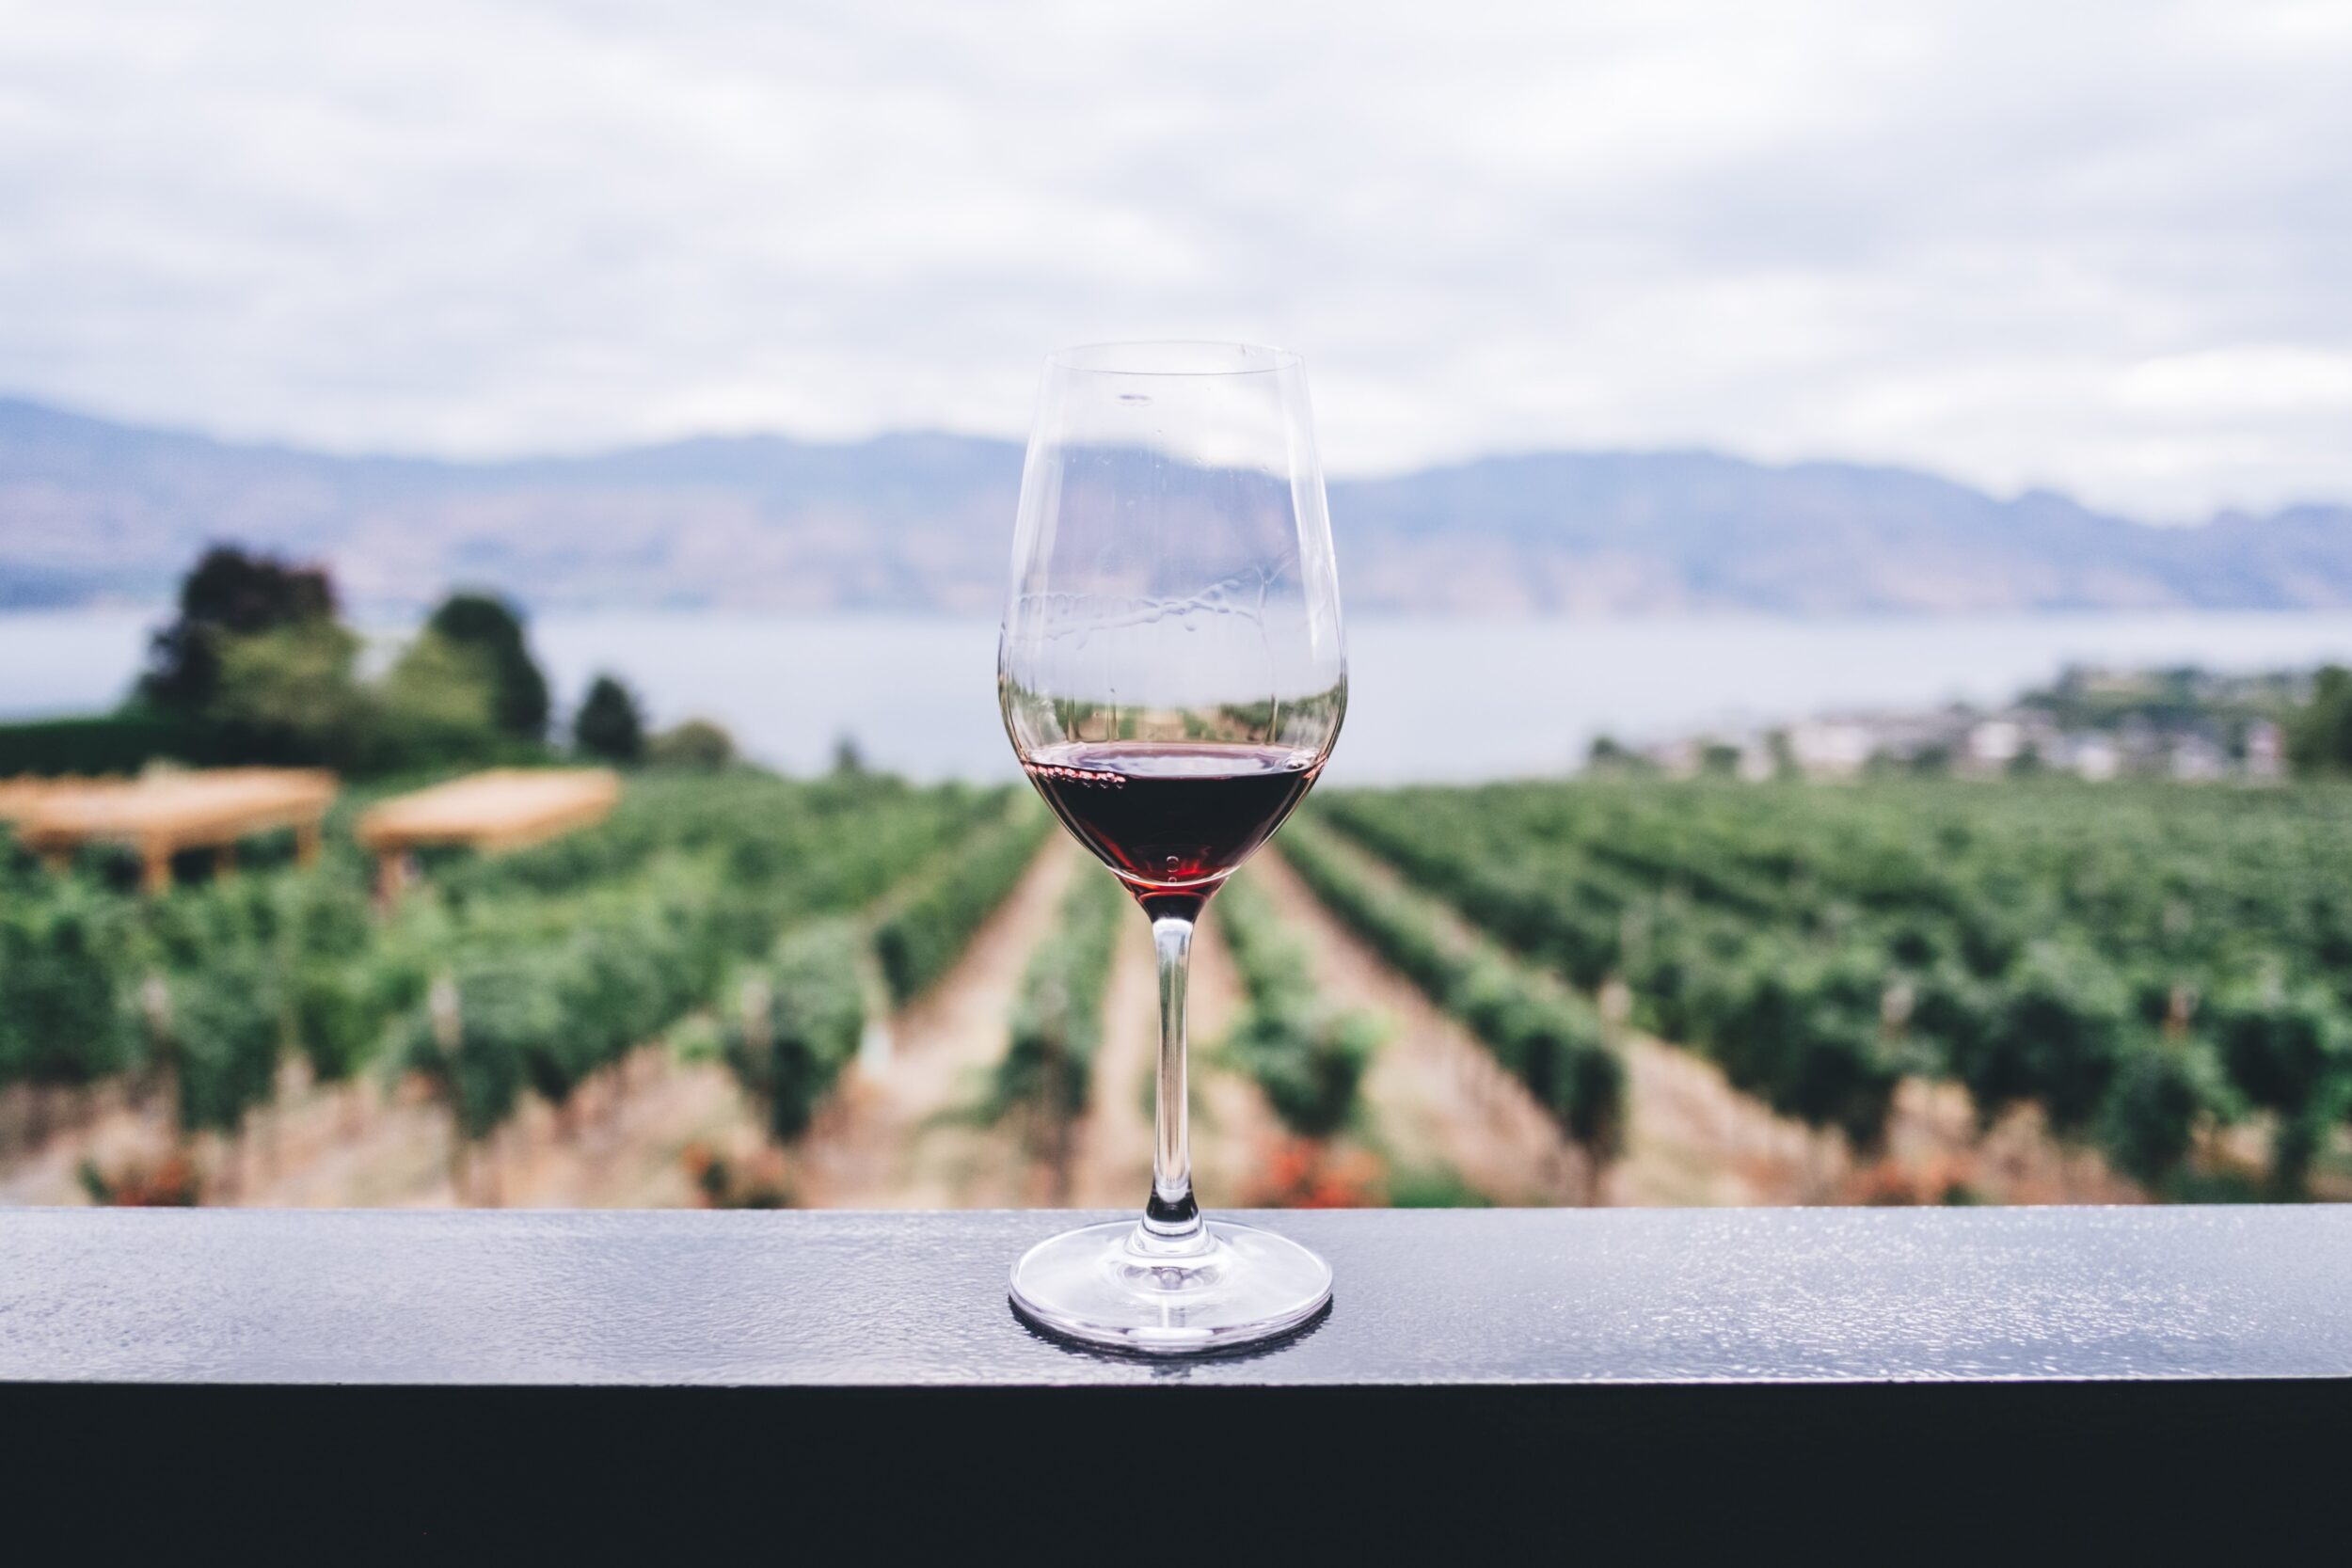 A wine glass rests on a balcony rail that overlooks a vineyard in Okanagan Valley, Canada. 